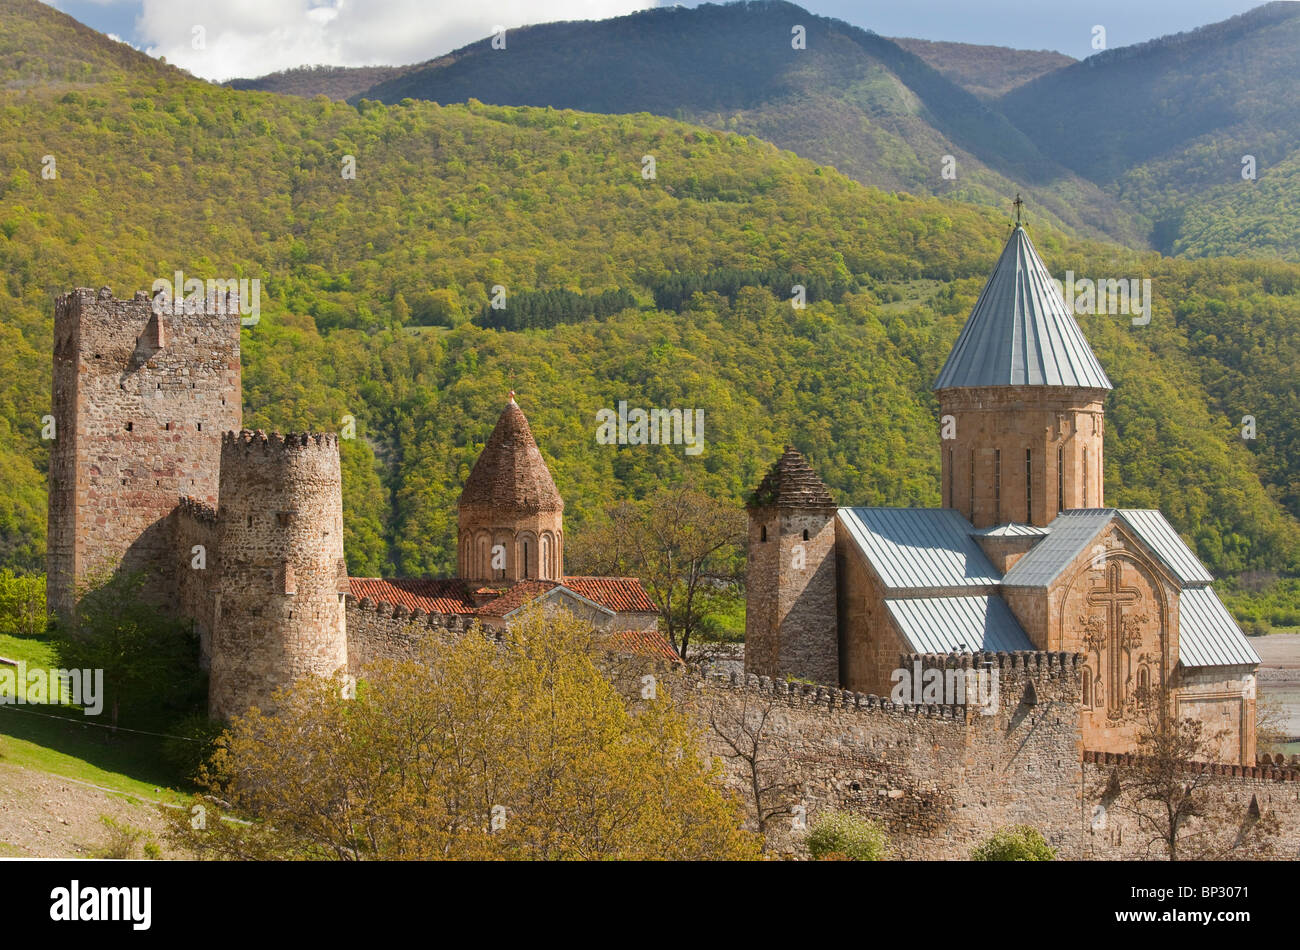 Ananuri - a mainly 17th century defensive and religious complex in the Aragvi River Valley, with wooded hills beyond; Georgia. Stock Photo